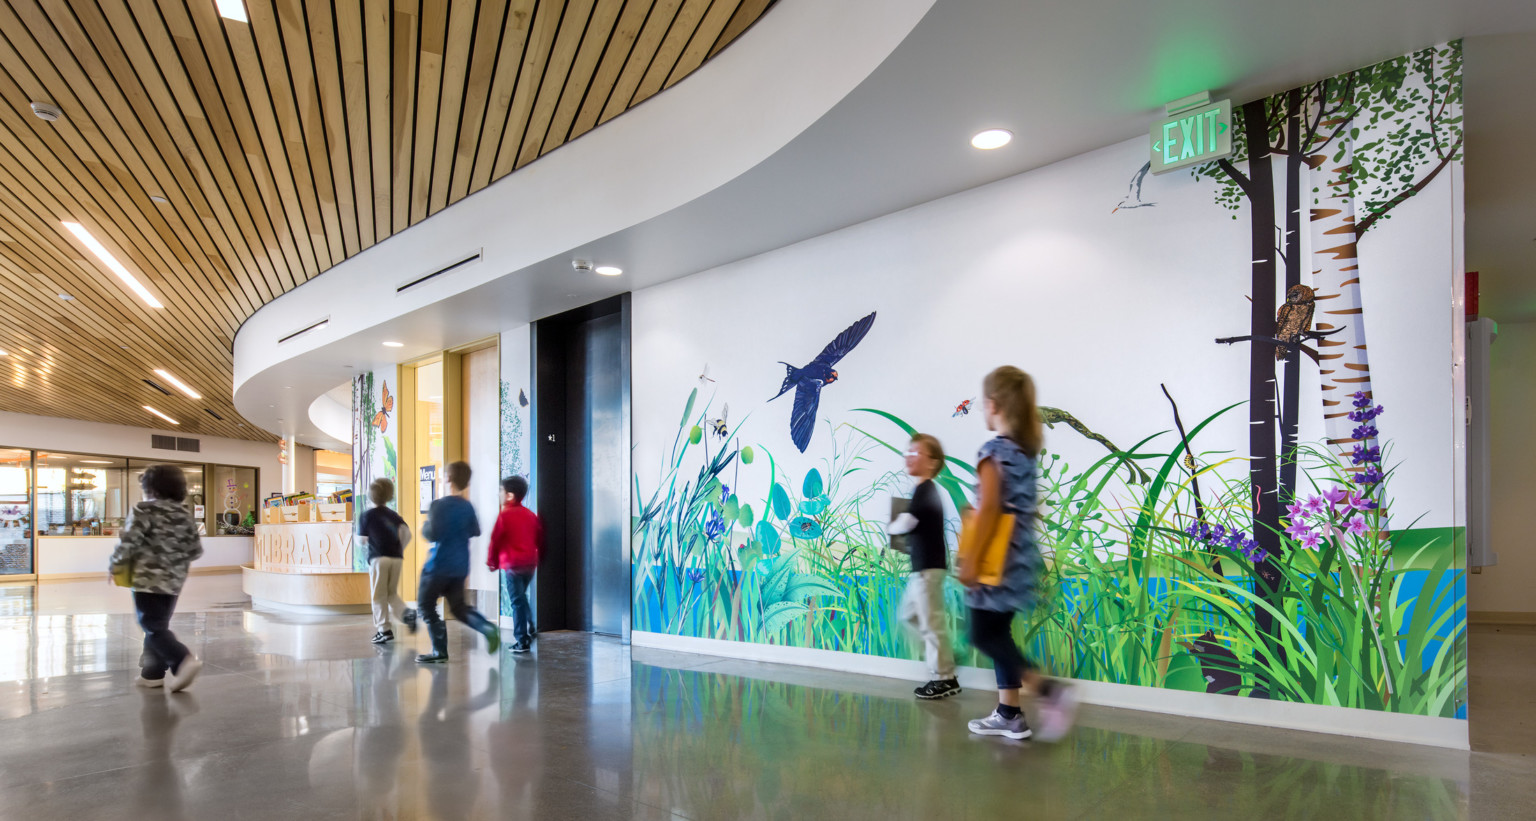 A curved hallway with wood panel ceiling and a mural along the wall of grass and animals. Wood desk curves with hall